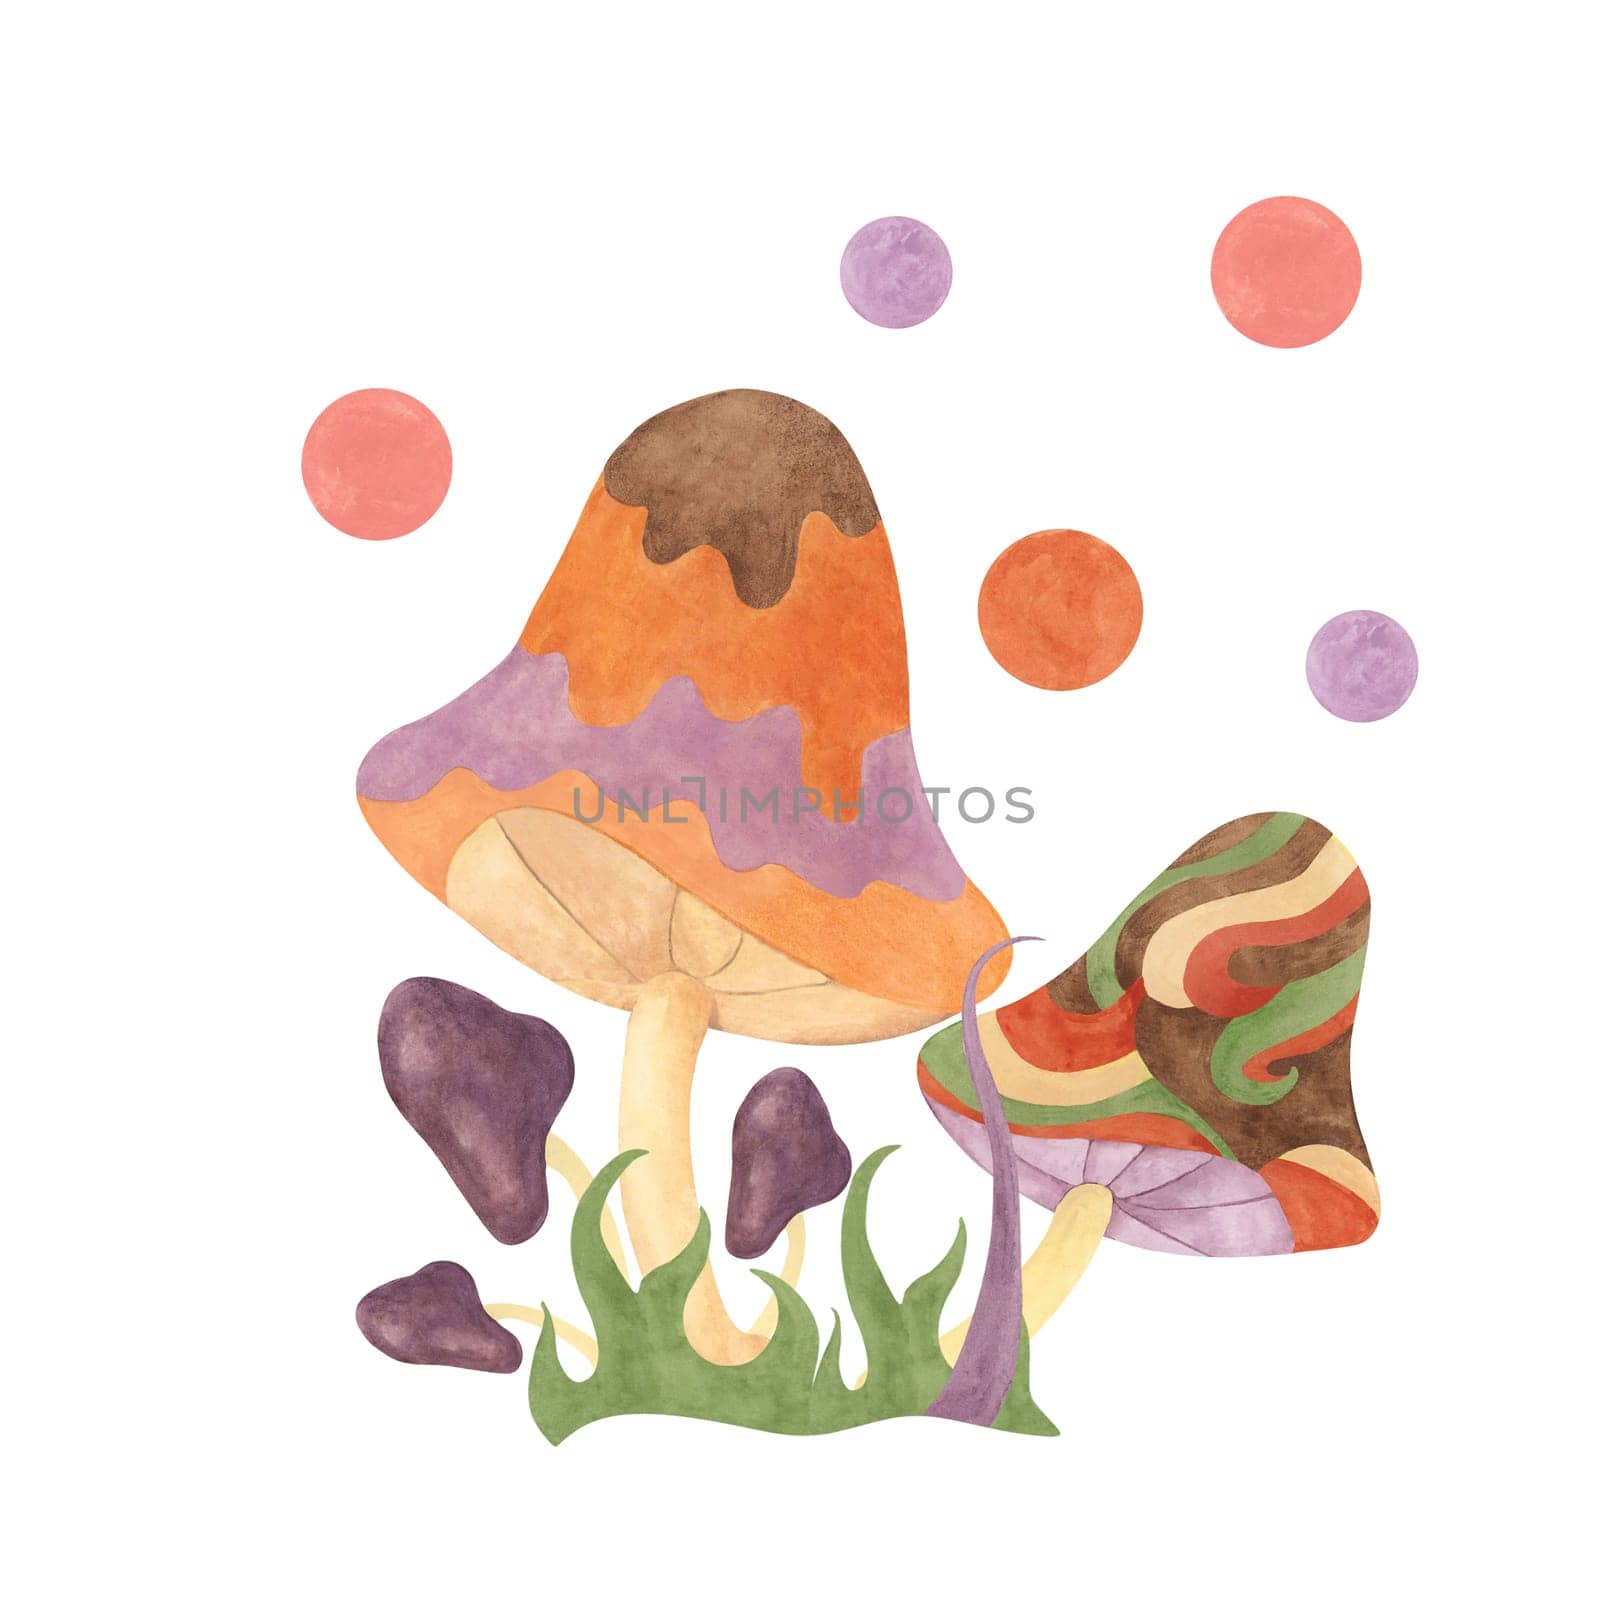 Retro hippie mushrooms and grass in 70s style. Hippie psychedelic groovy fungus cliparts. Watercolor groovy illustration for printing cartoon style by Fofito